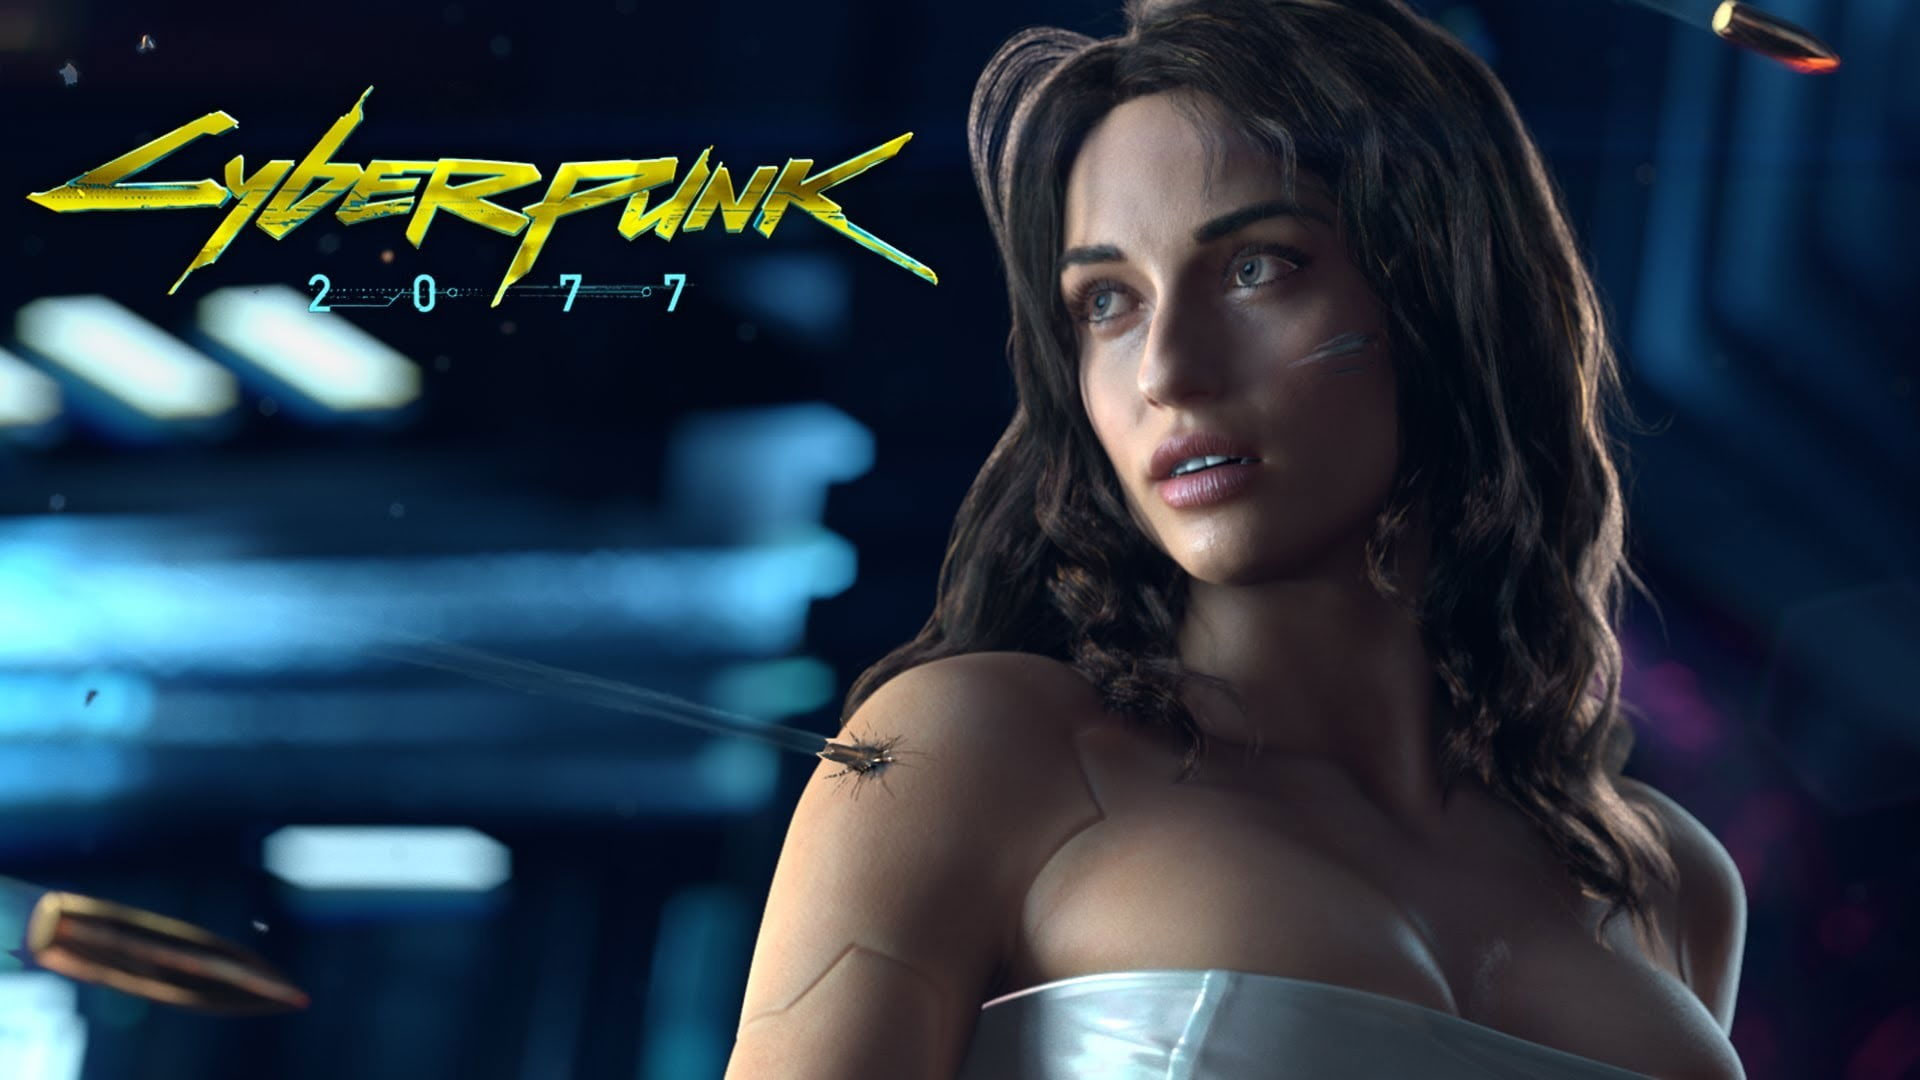 Cyberpunk 2077 wallpaper, video games, game poster, young adult, one person